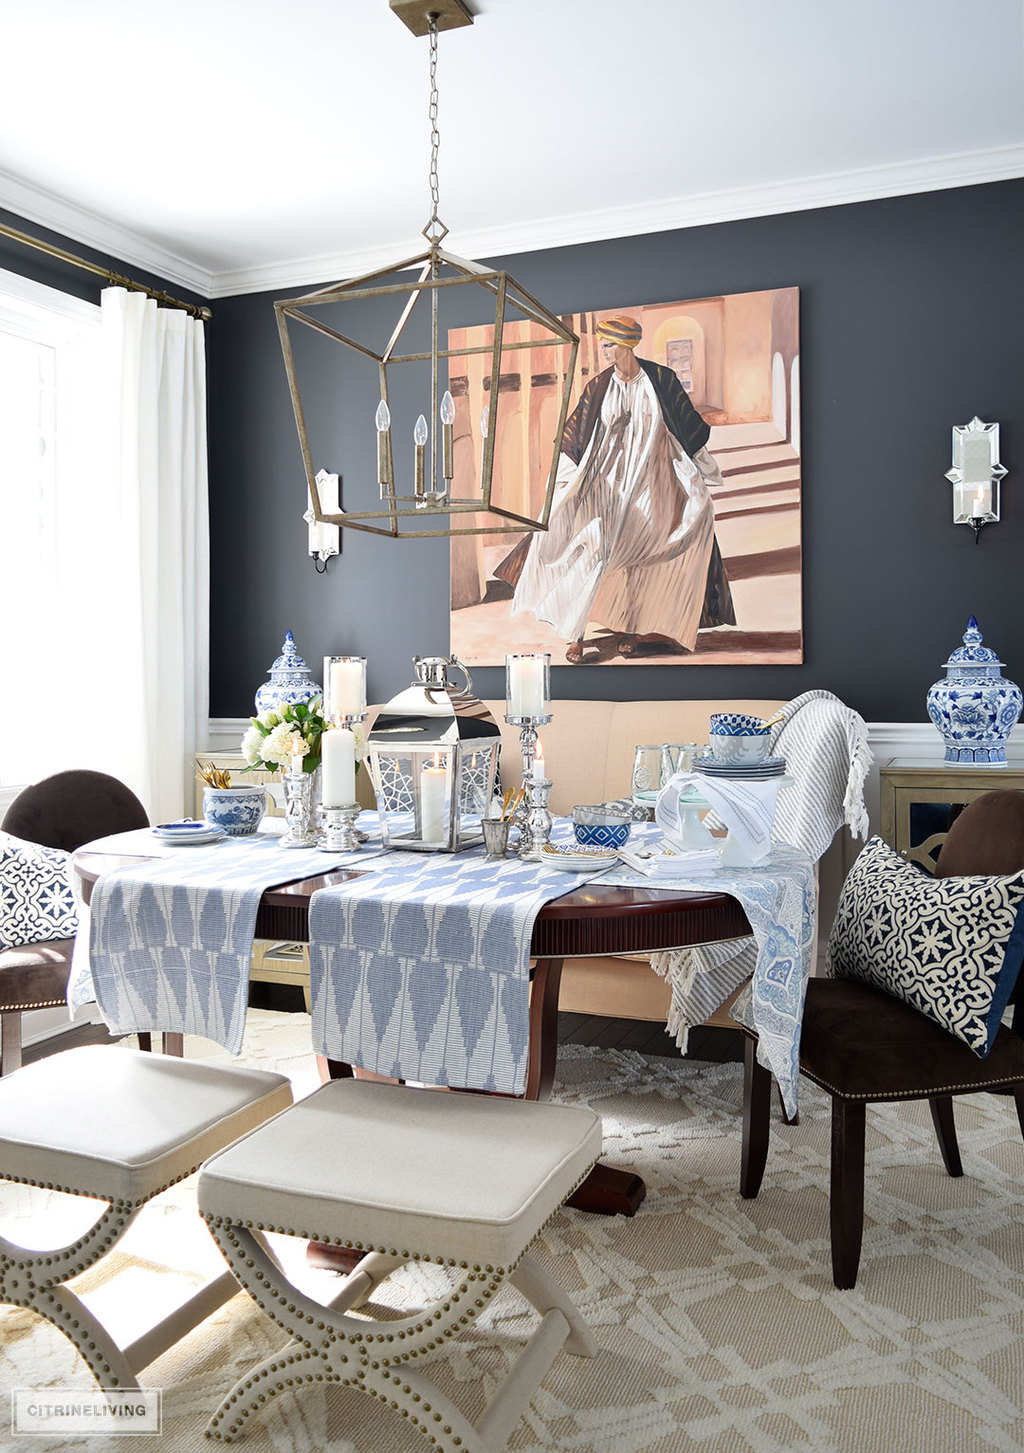 Bring a fresh Spring vibe to your decor with a mix of blue and white pattern and texture.